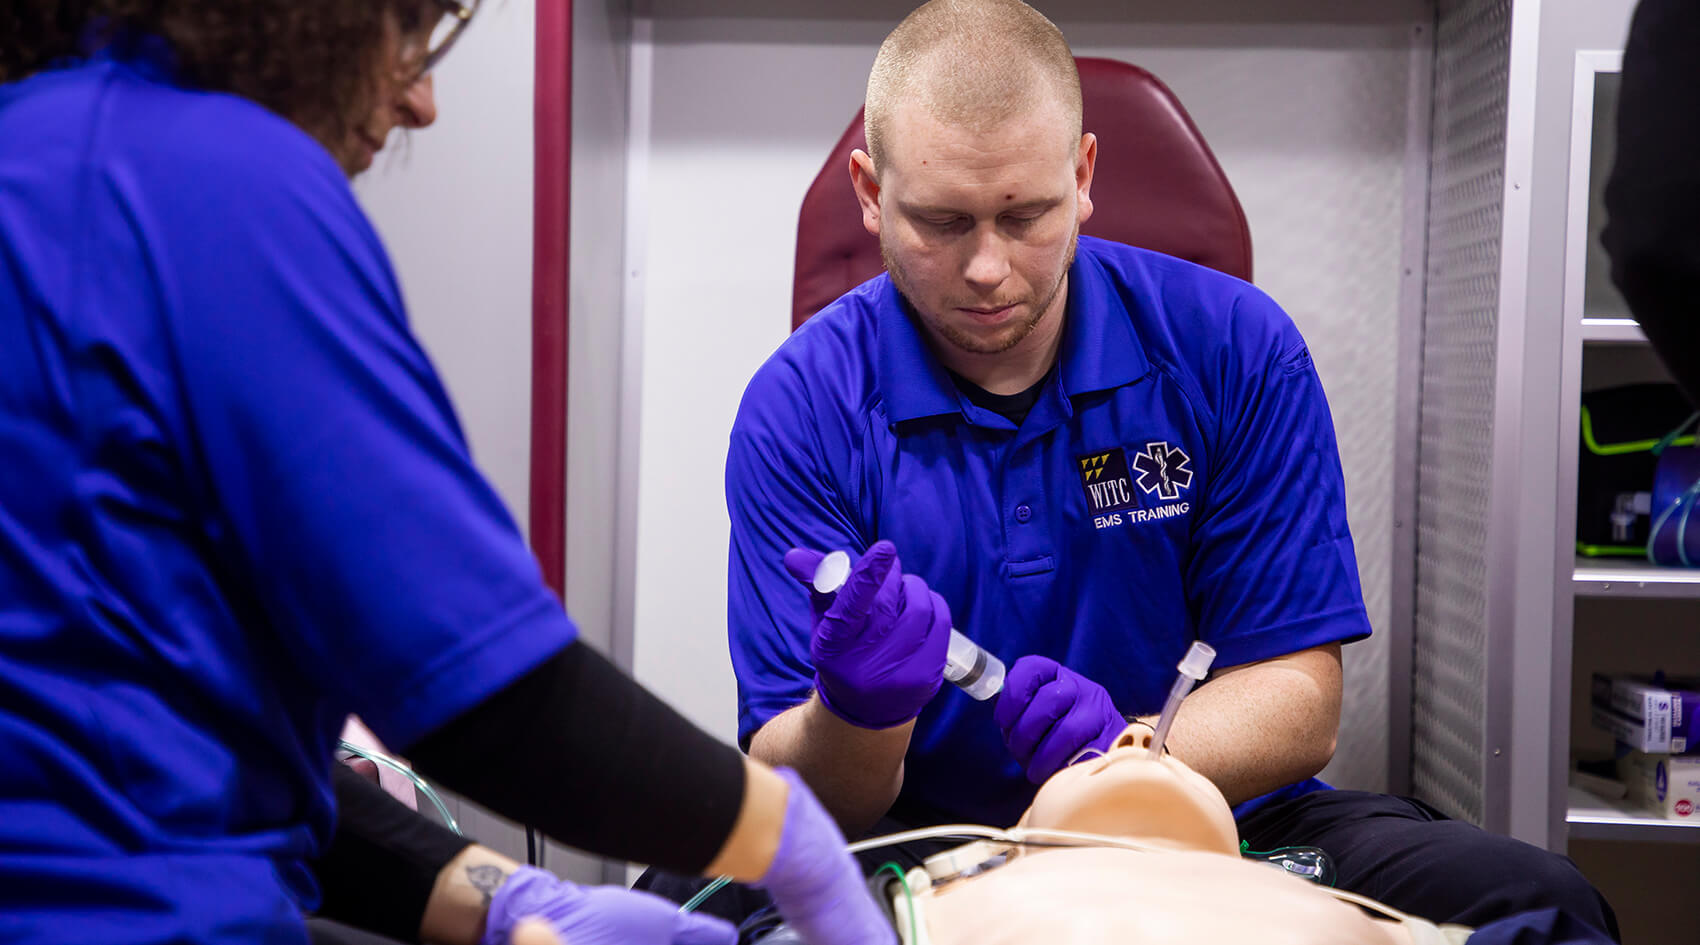 EMT students doing hands-on work with a simulated person